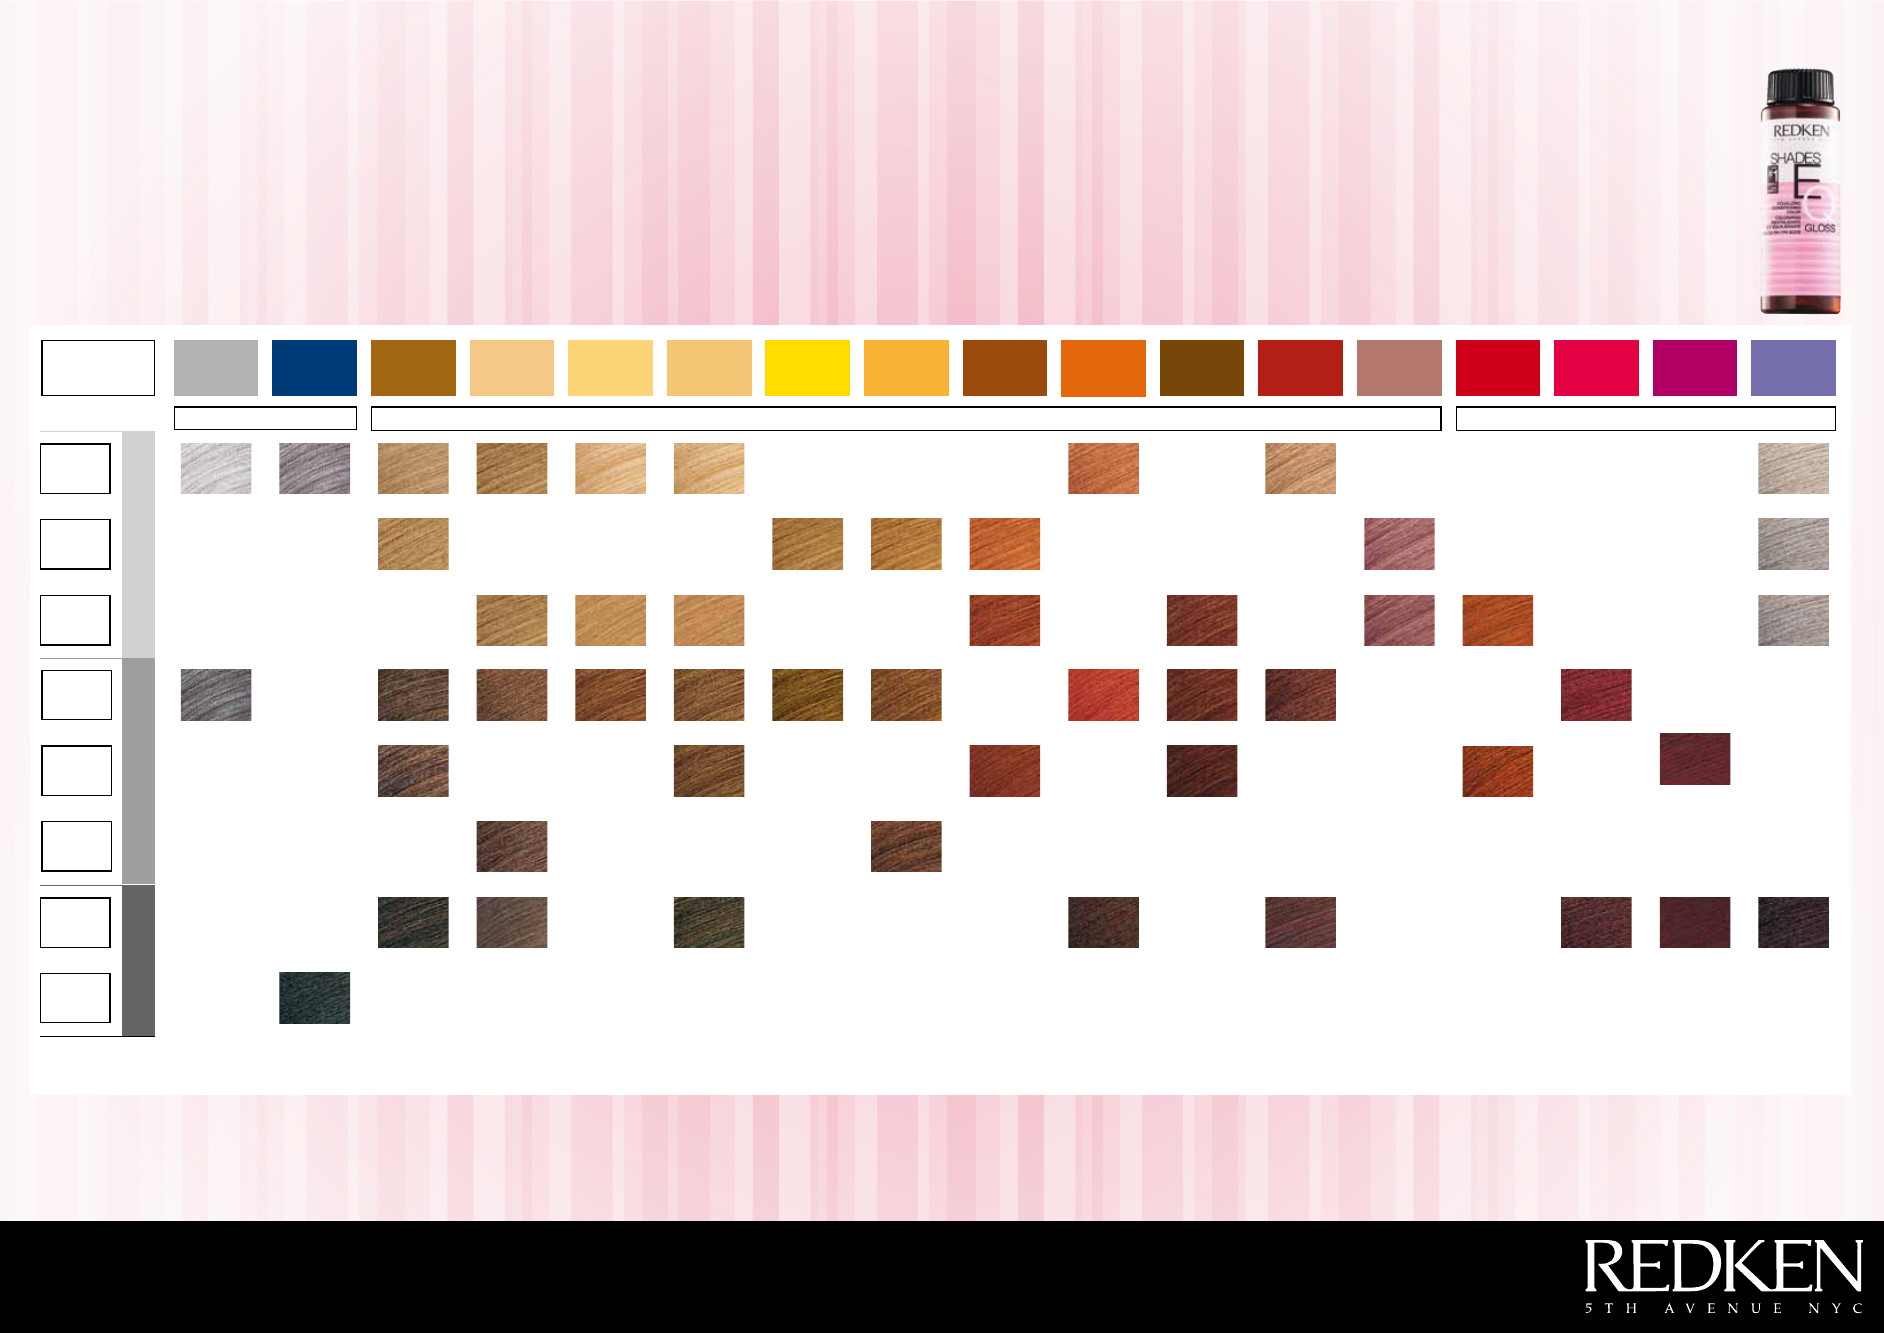 Find Your Perfect Hair Color Match: This Redken Shades EQ Cream Chart Reveals All